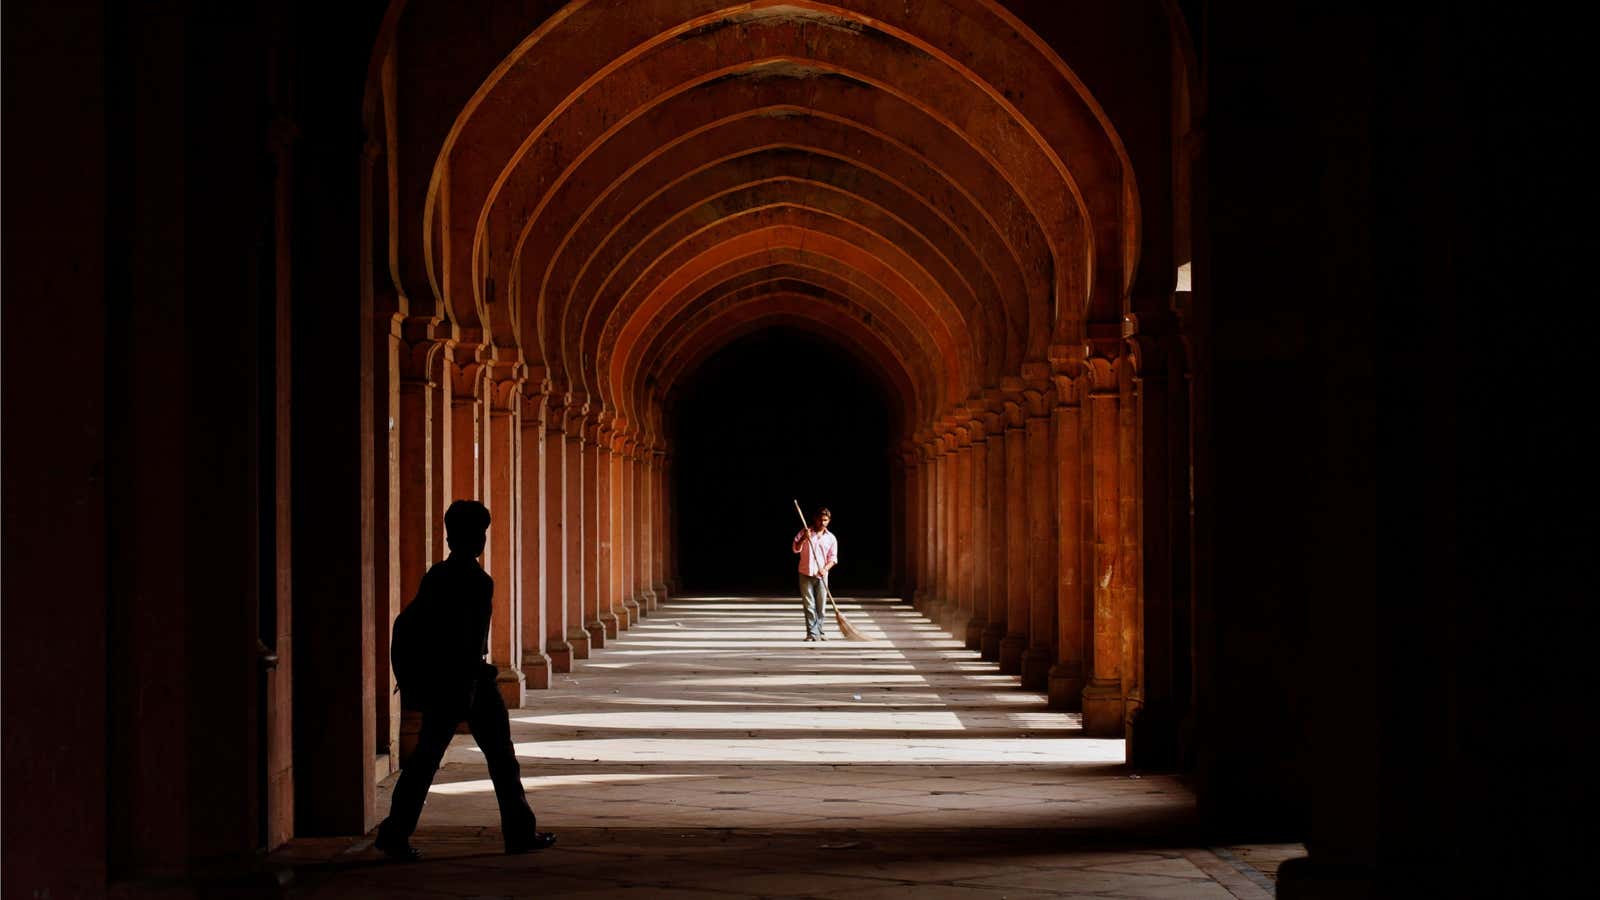 Indian students must emerge from the shadows if they want to fix higher education.